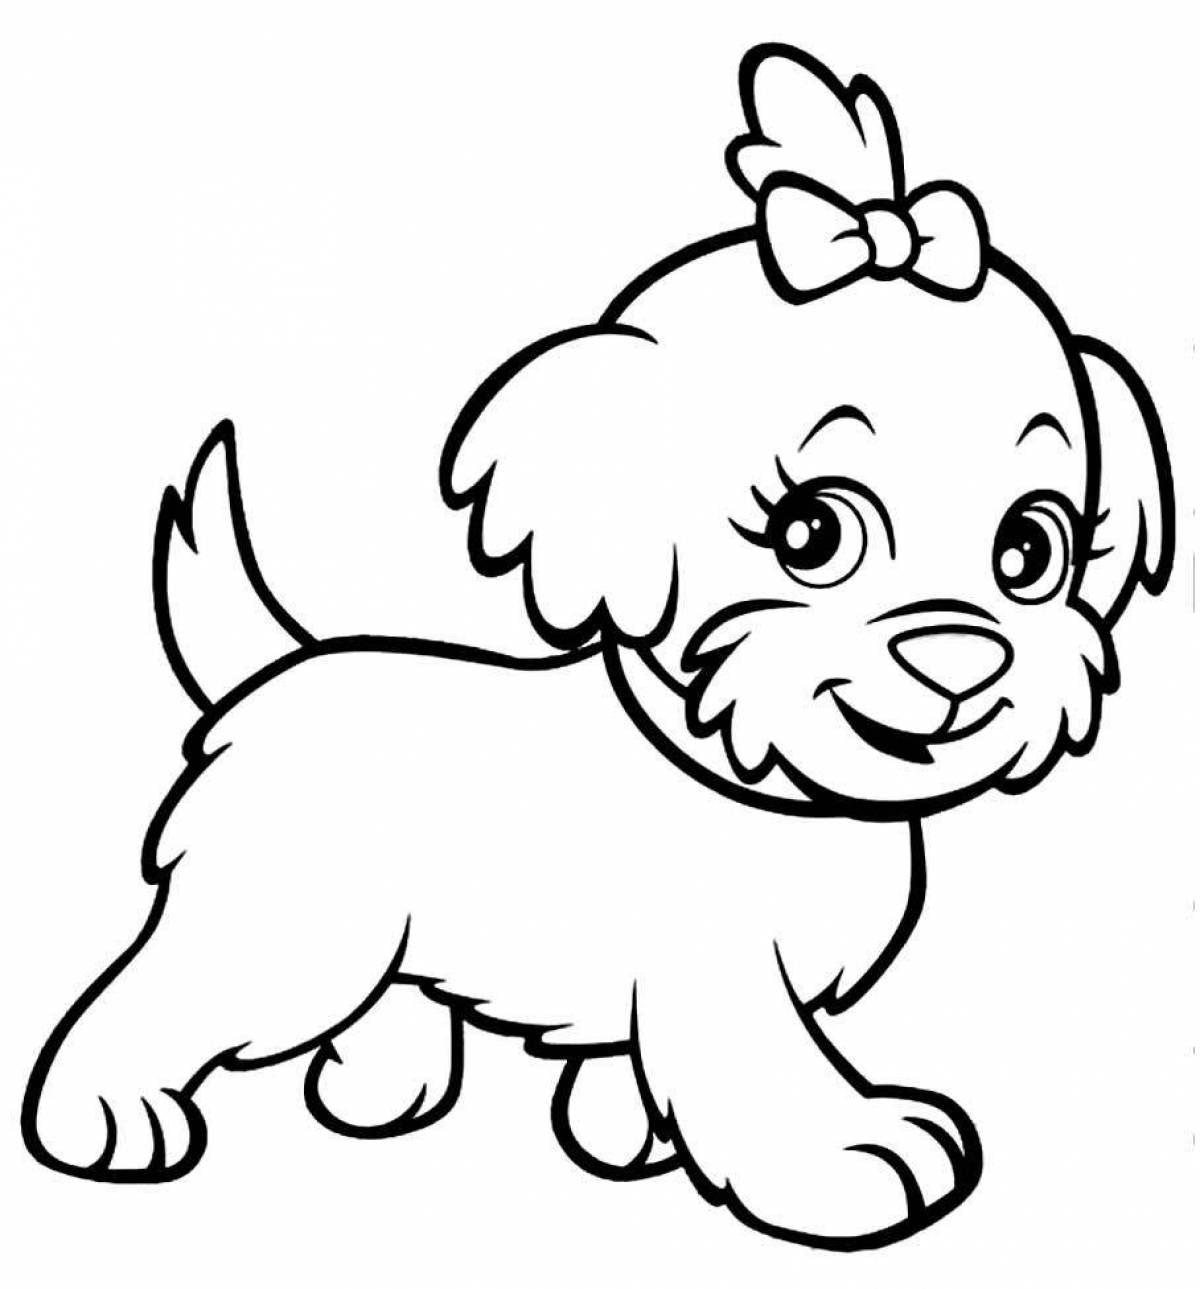 Coloring dog #3